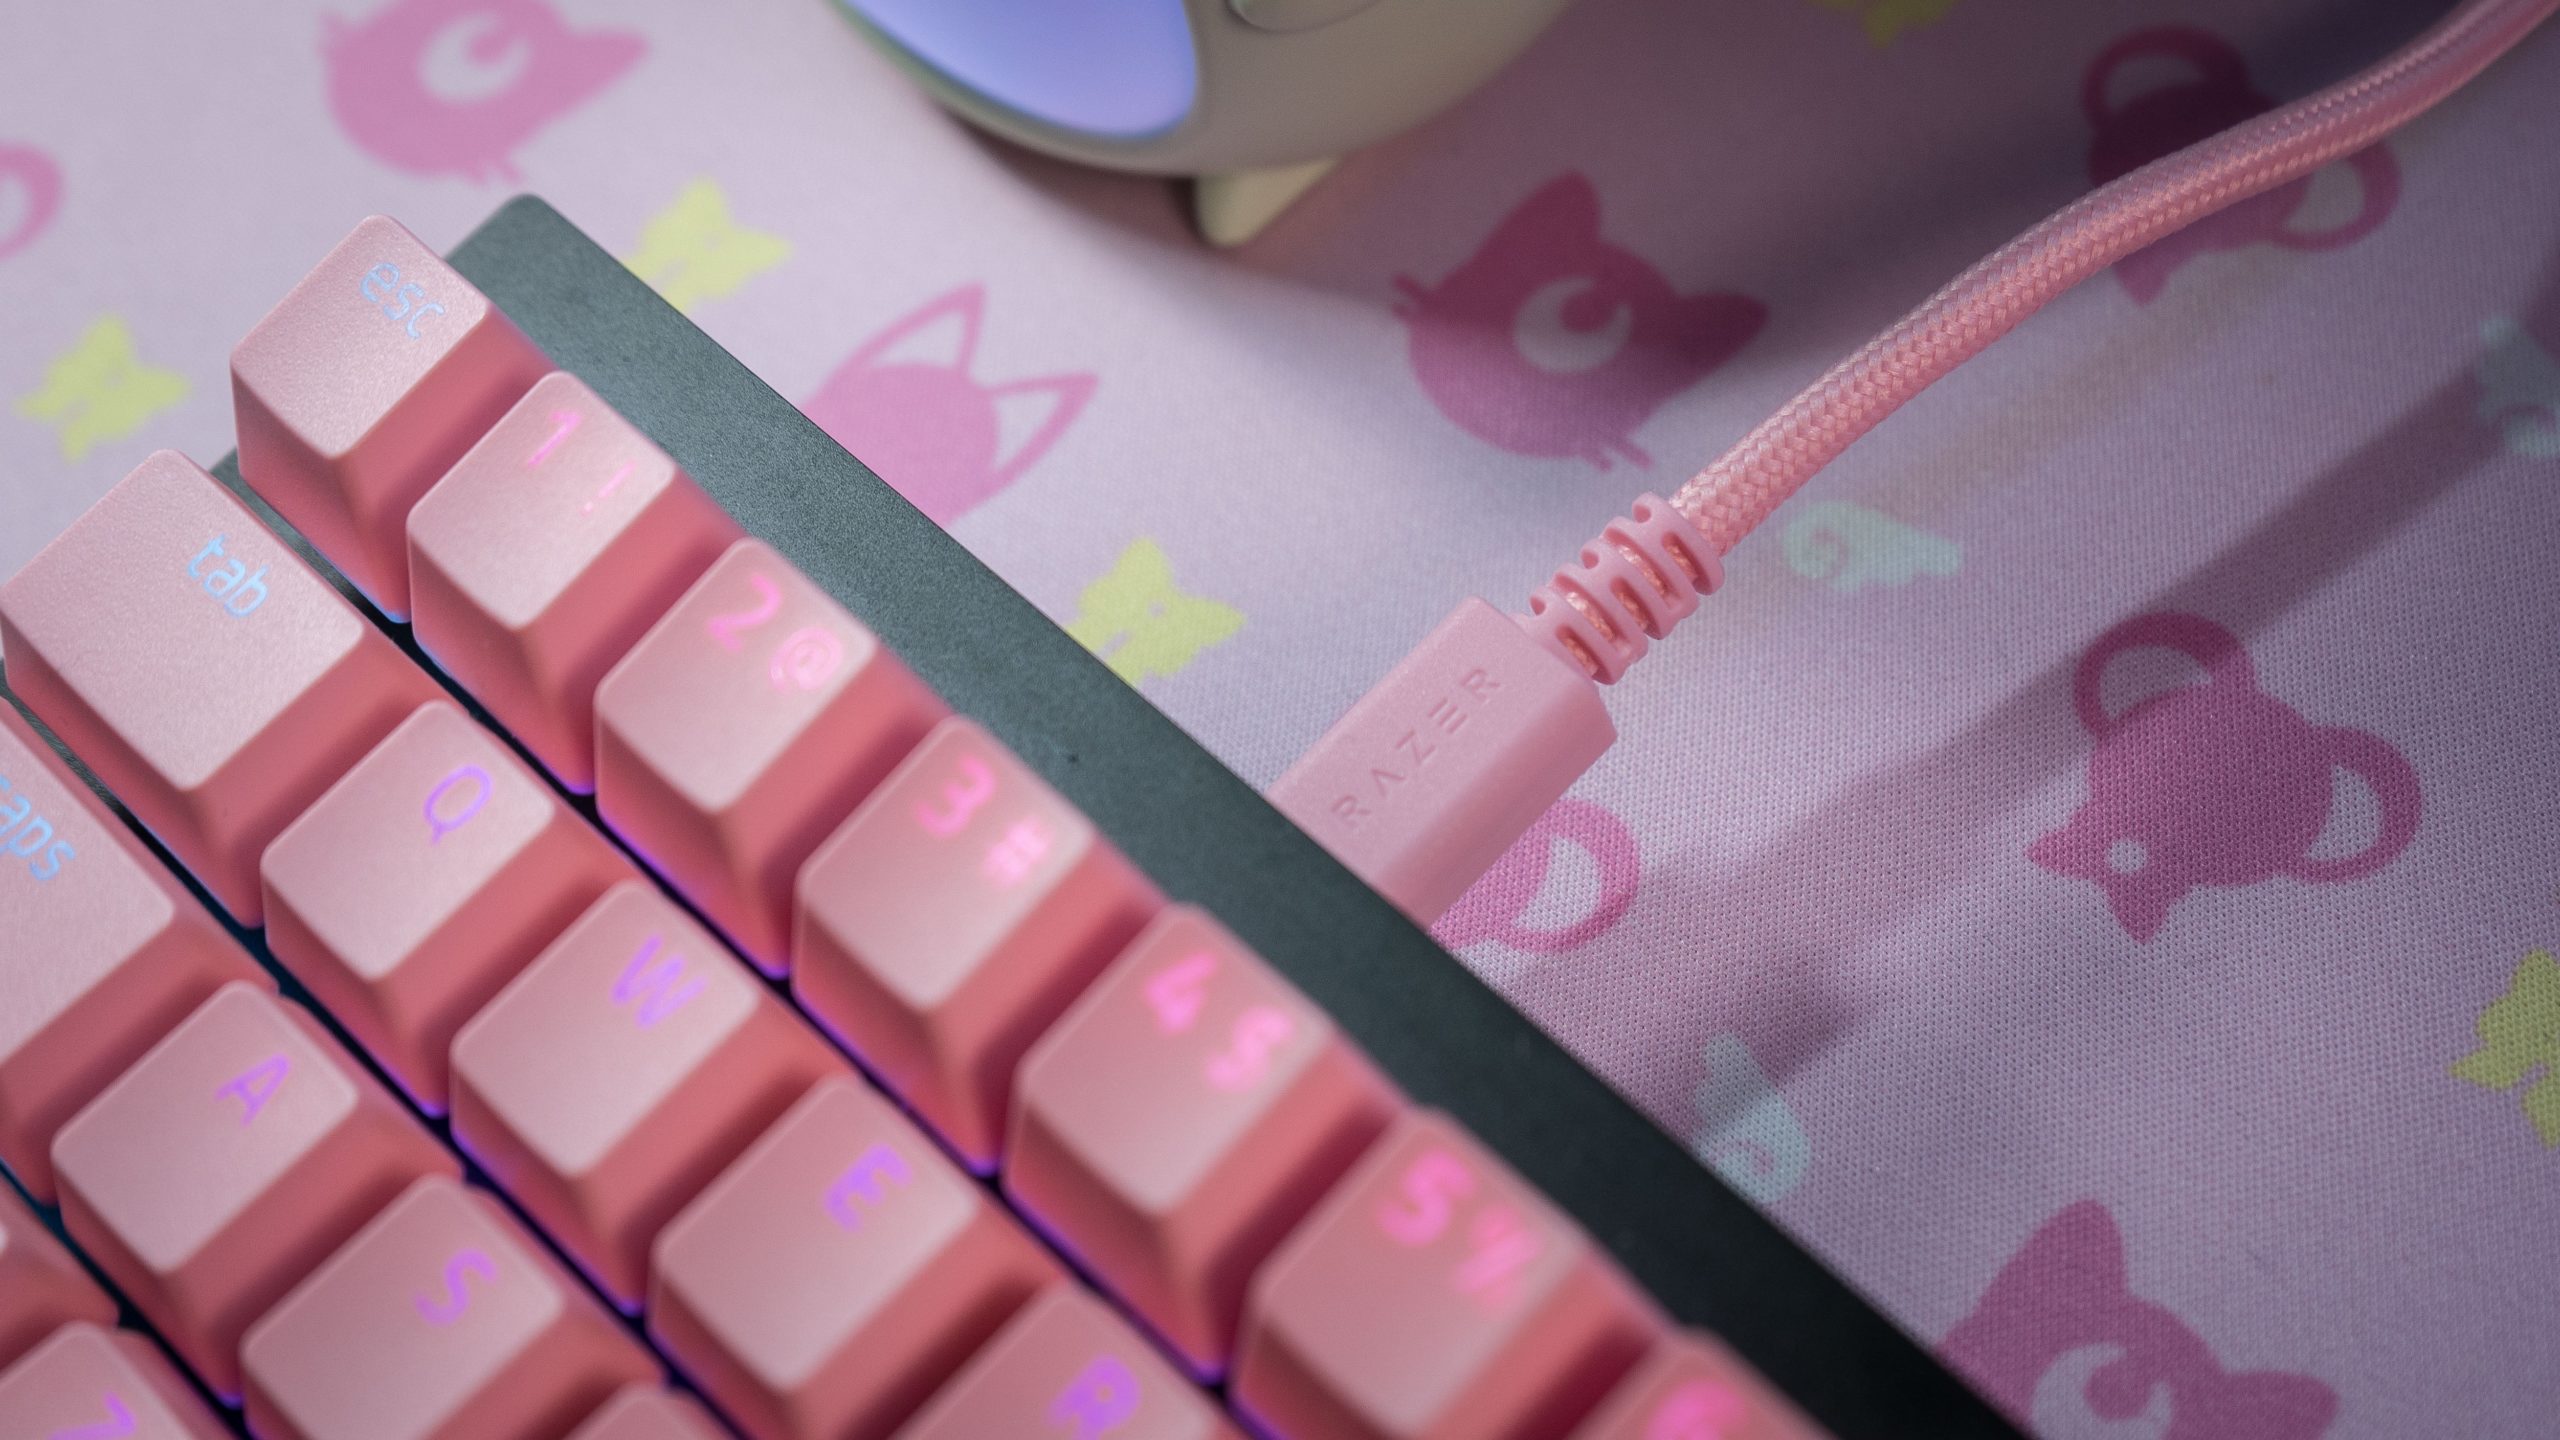 Razer's pink coiled cable is a slightly different tone of pink compared to the keycaps.  (Photo: Florence Ion / Gizmodo)